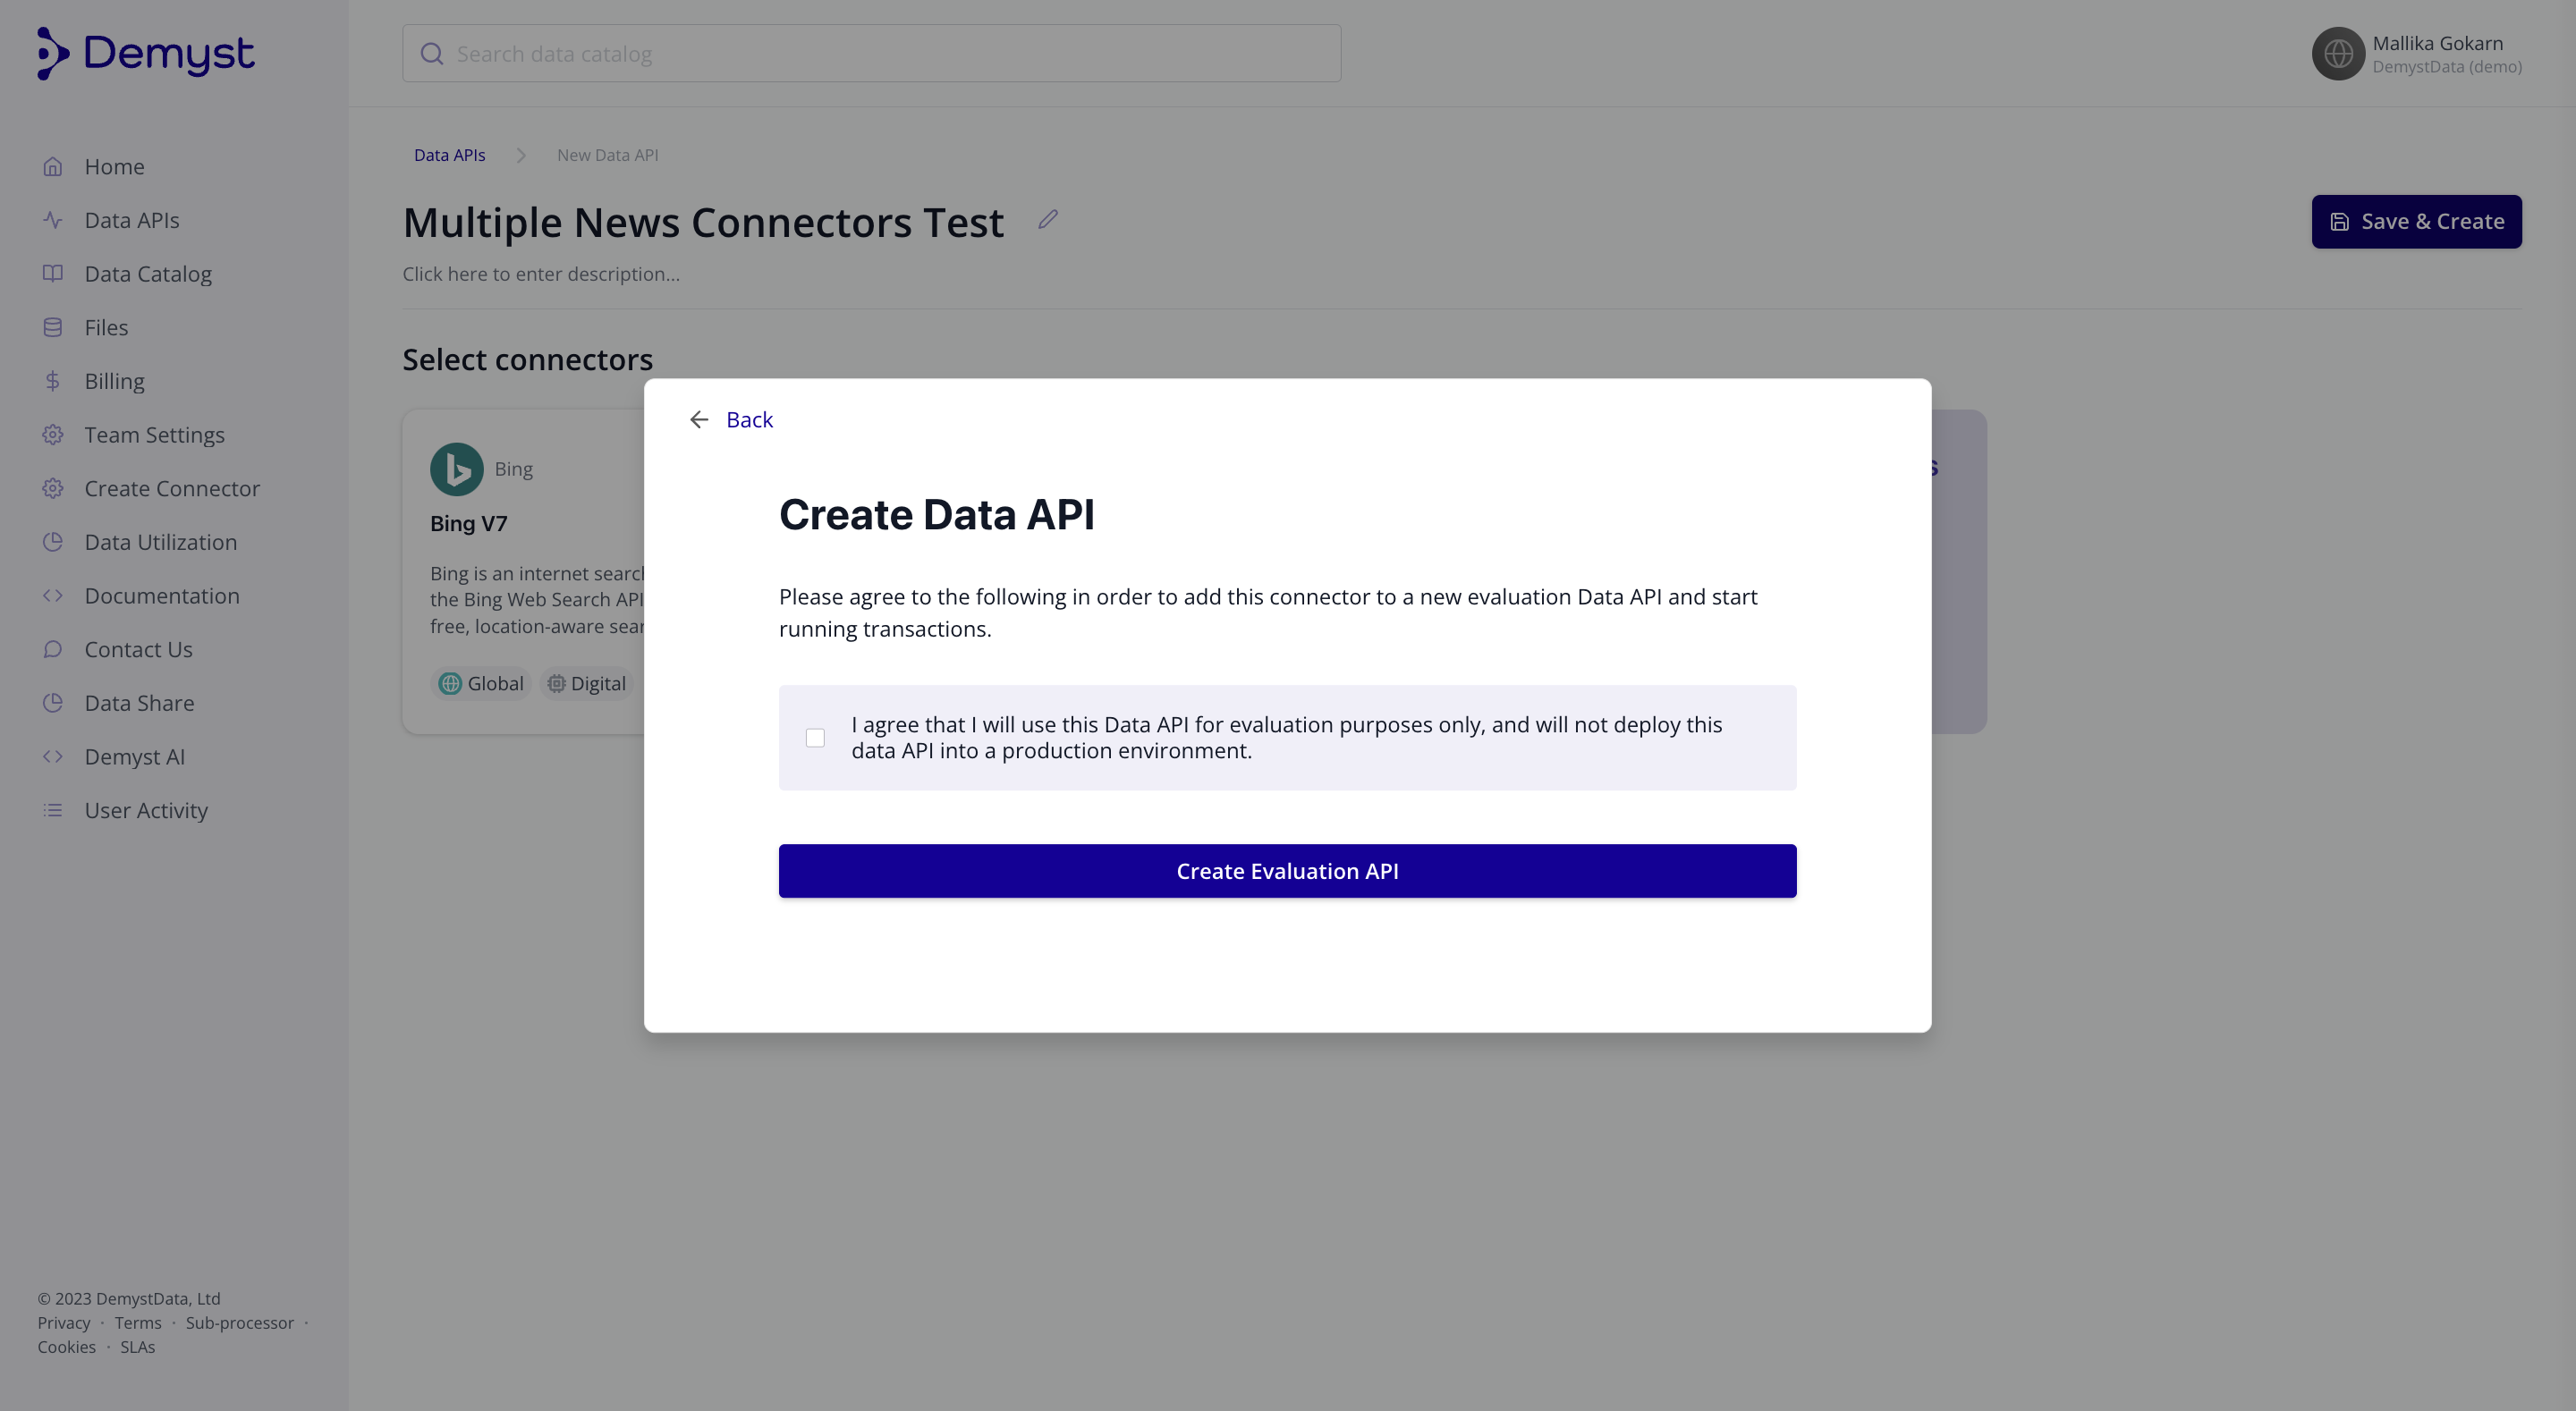 Accept the terms and conditions to Create a new Evaluation API.